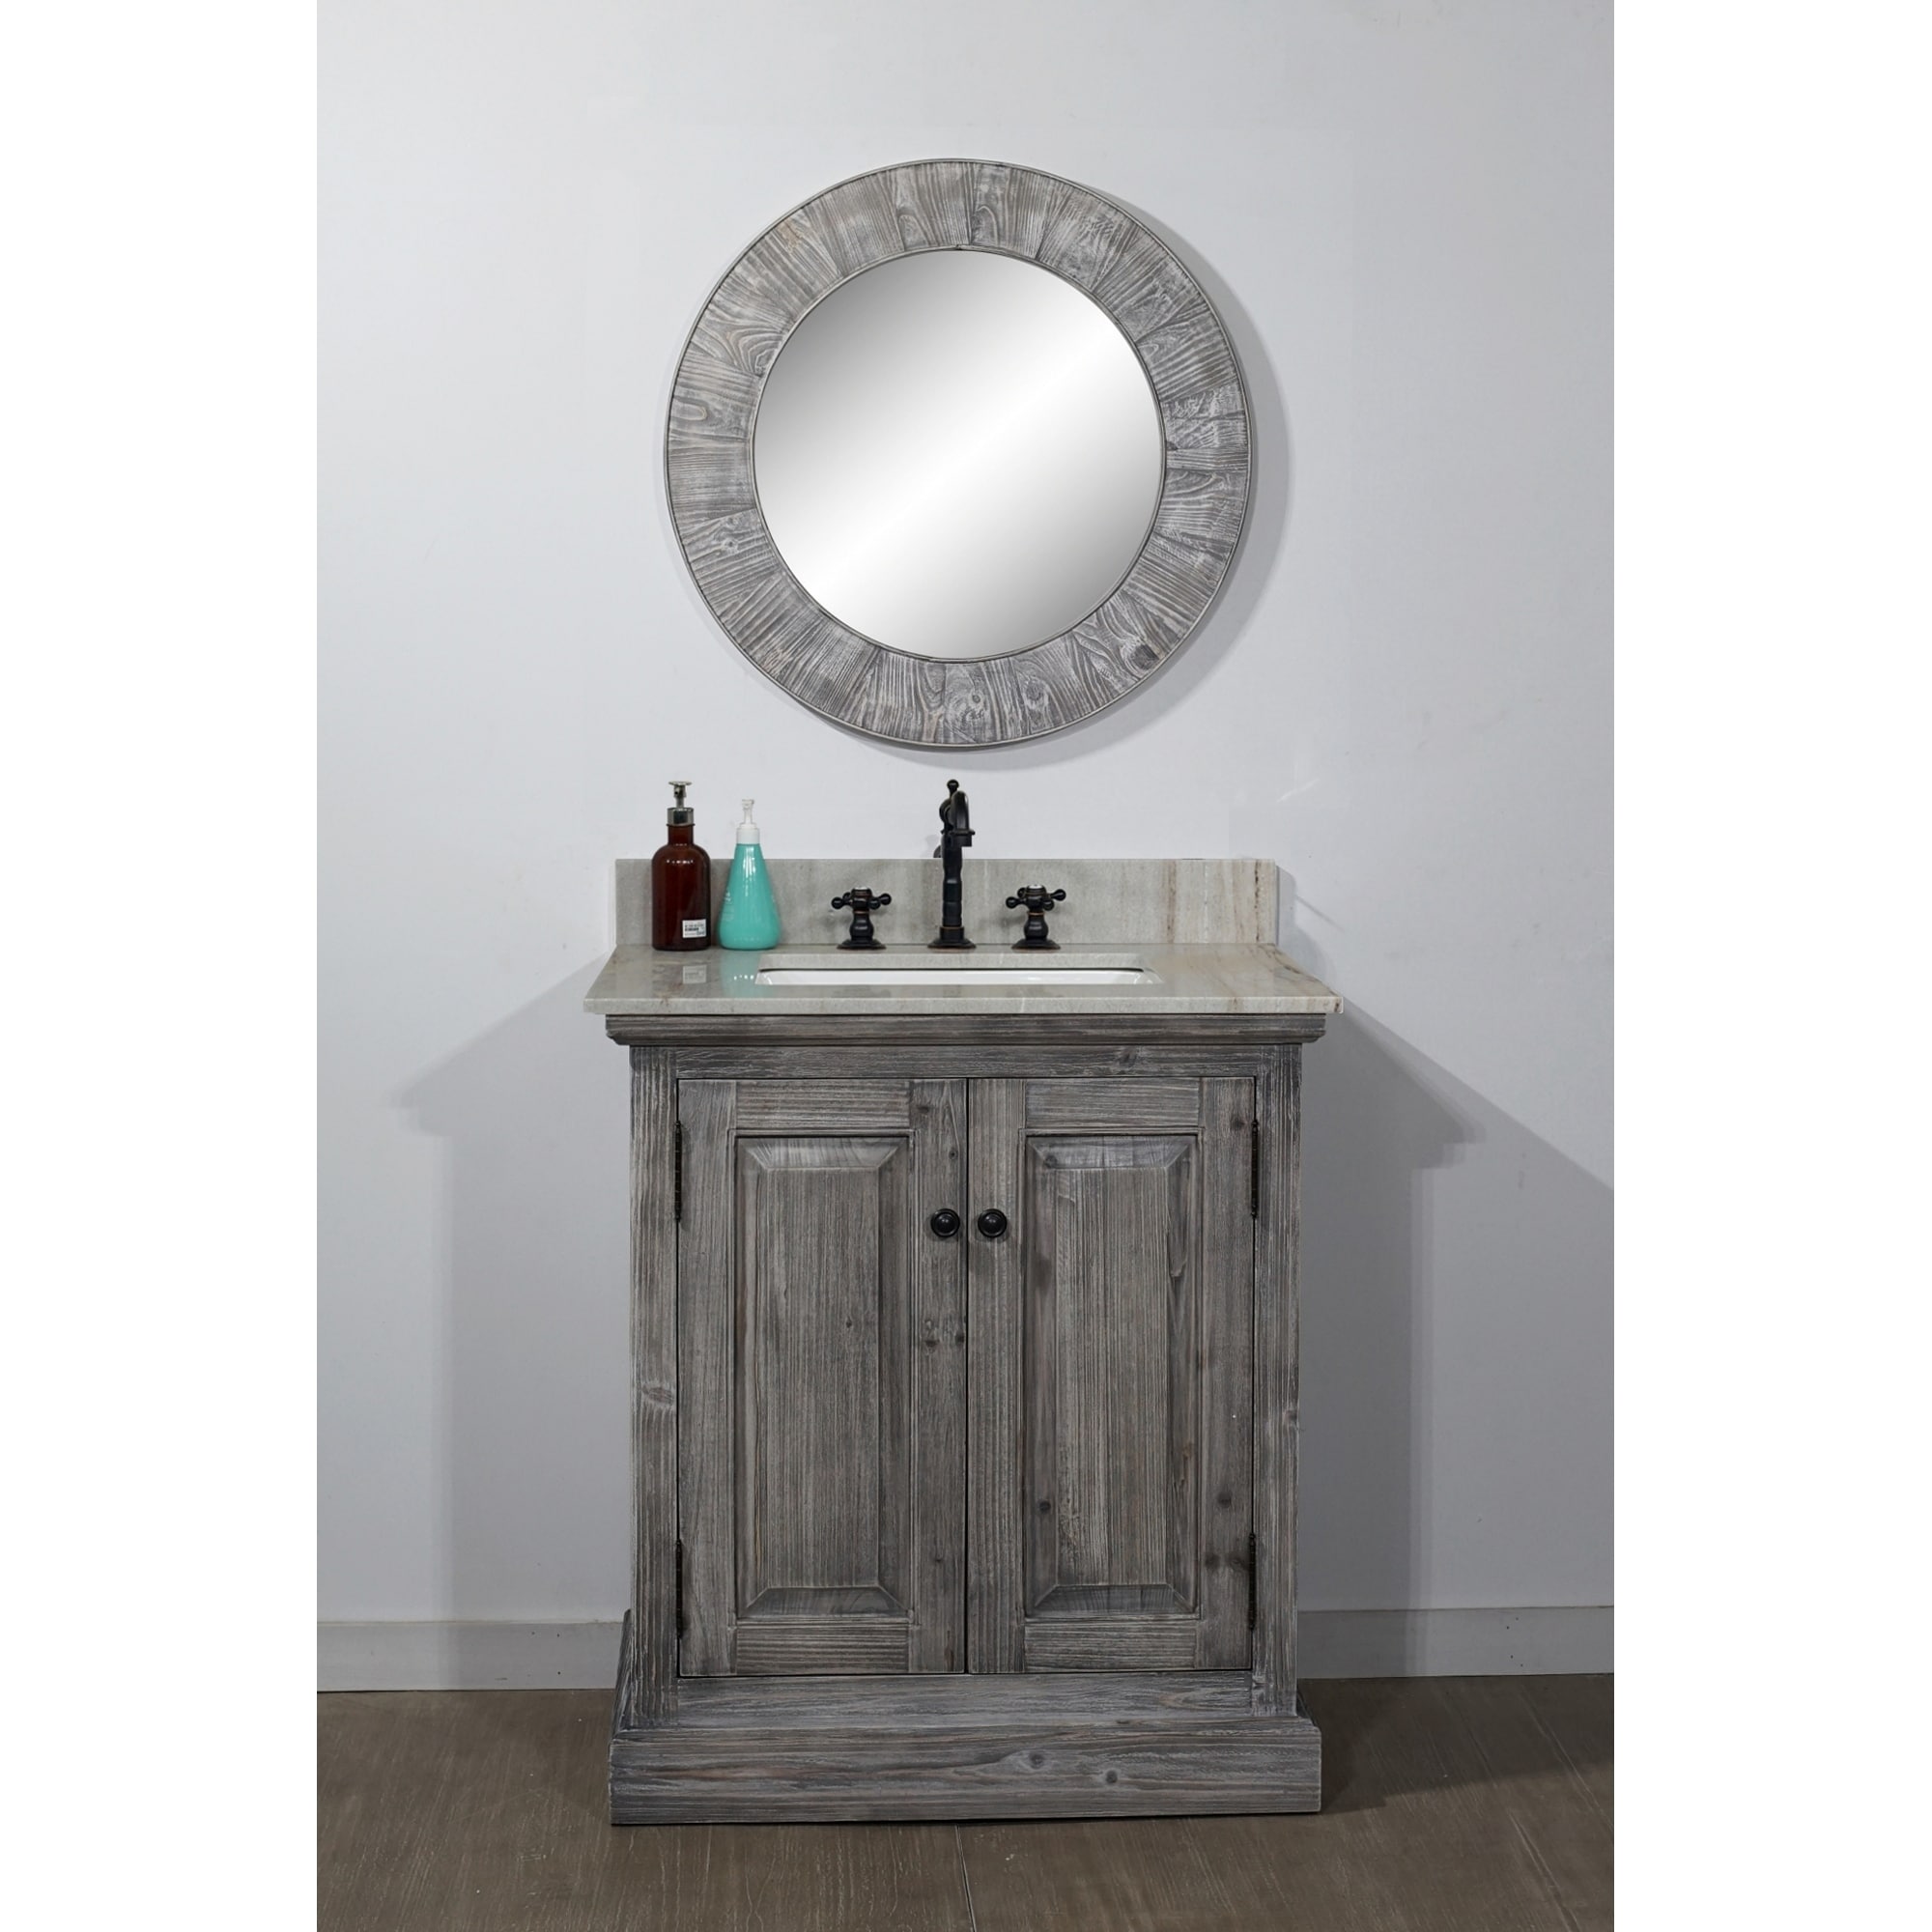 Shop Rustic Style 31 Inch Single Sink Bathroom Vanity With Coastal Sand Marble Top No Faucet Free Shipping Today Overstock 30569547 Grey Driftwood